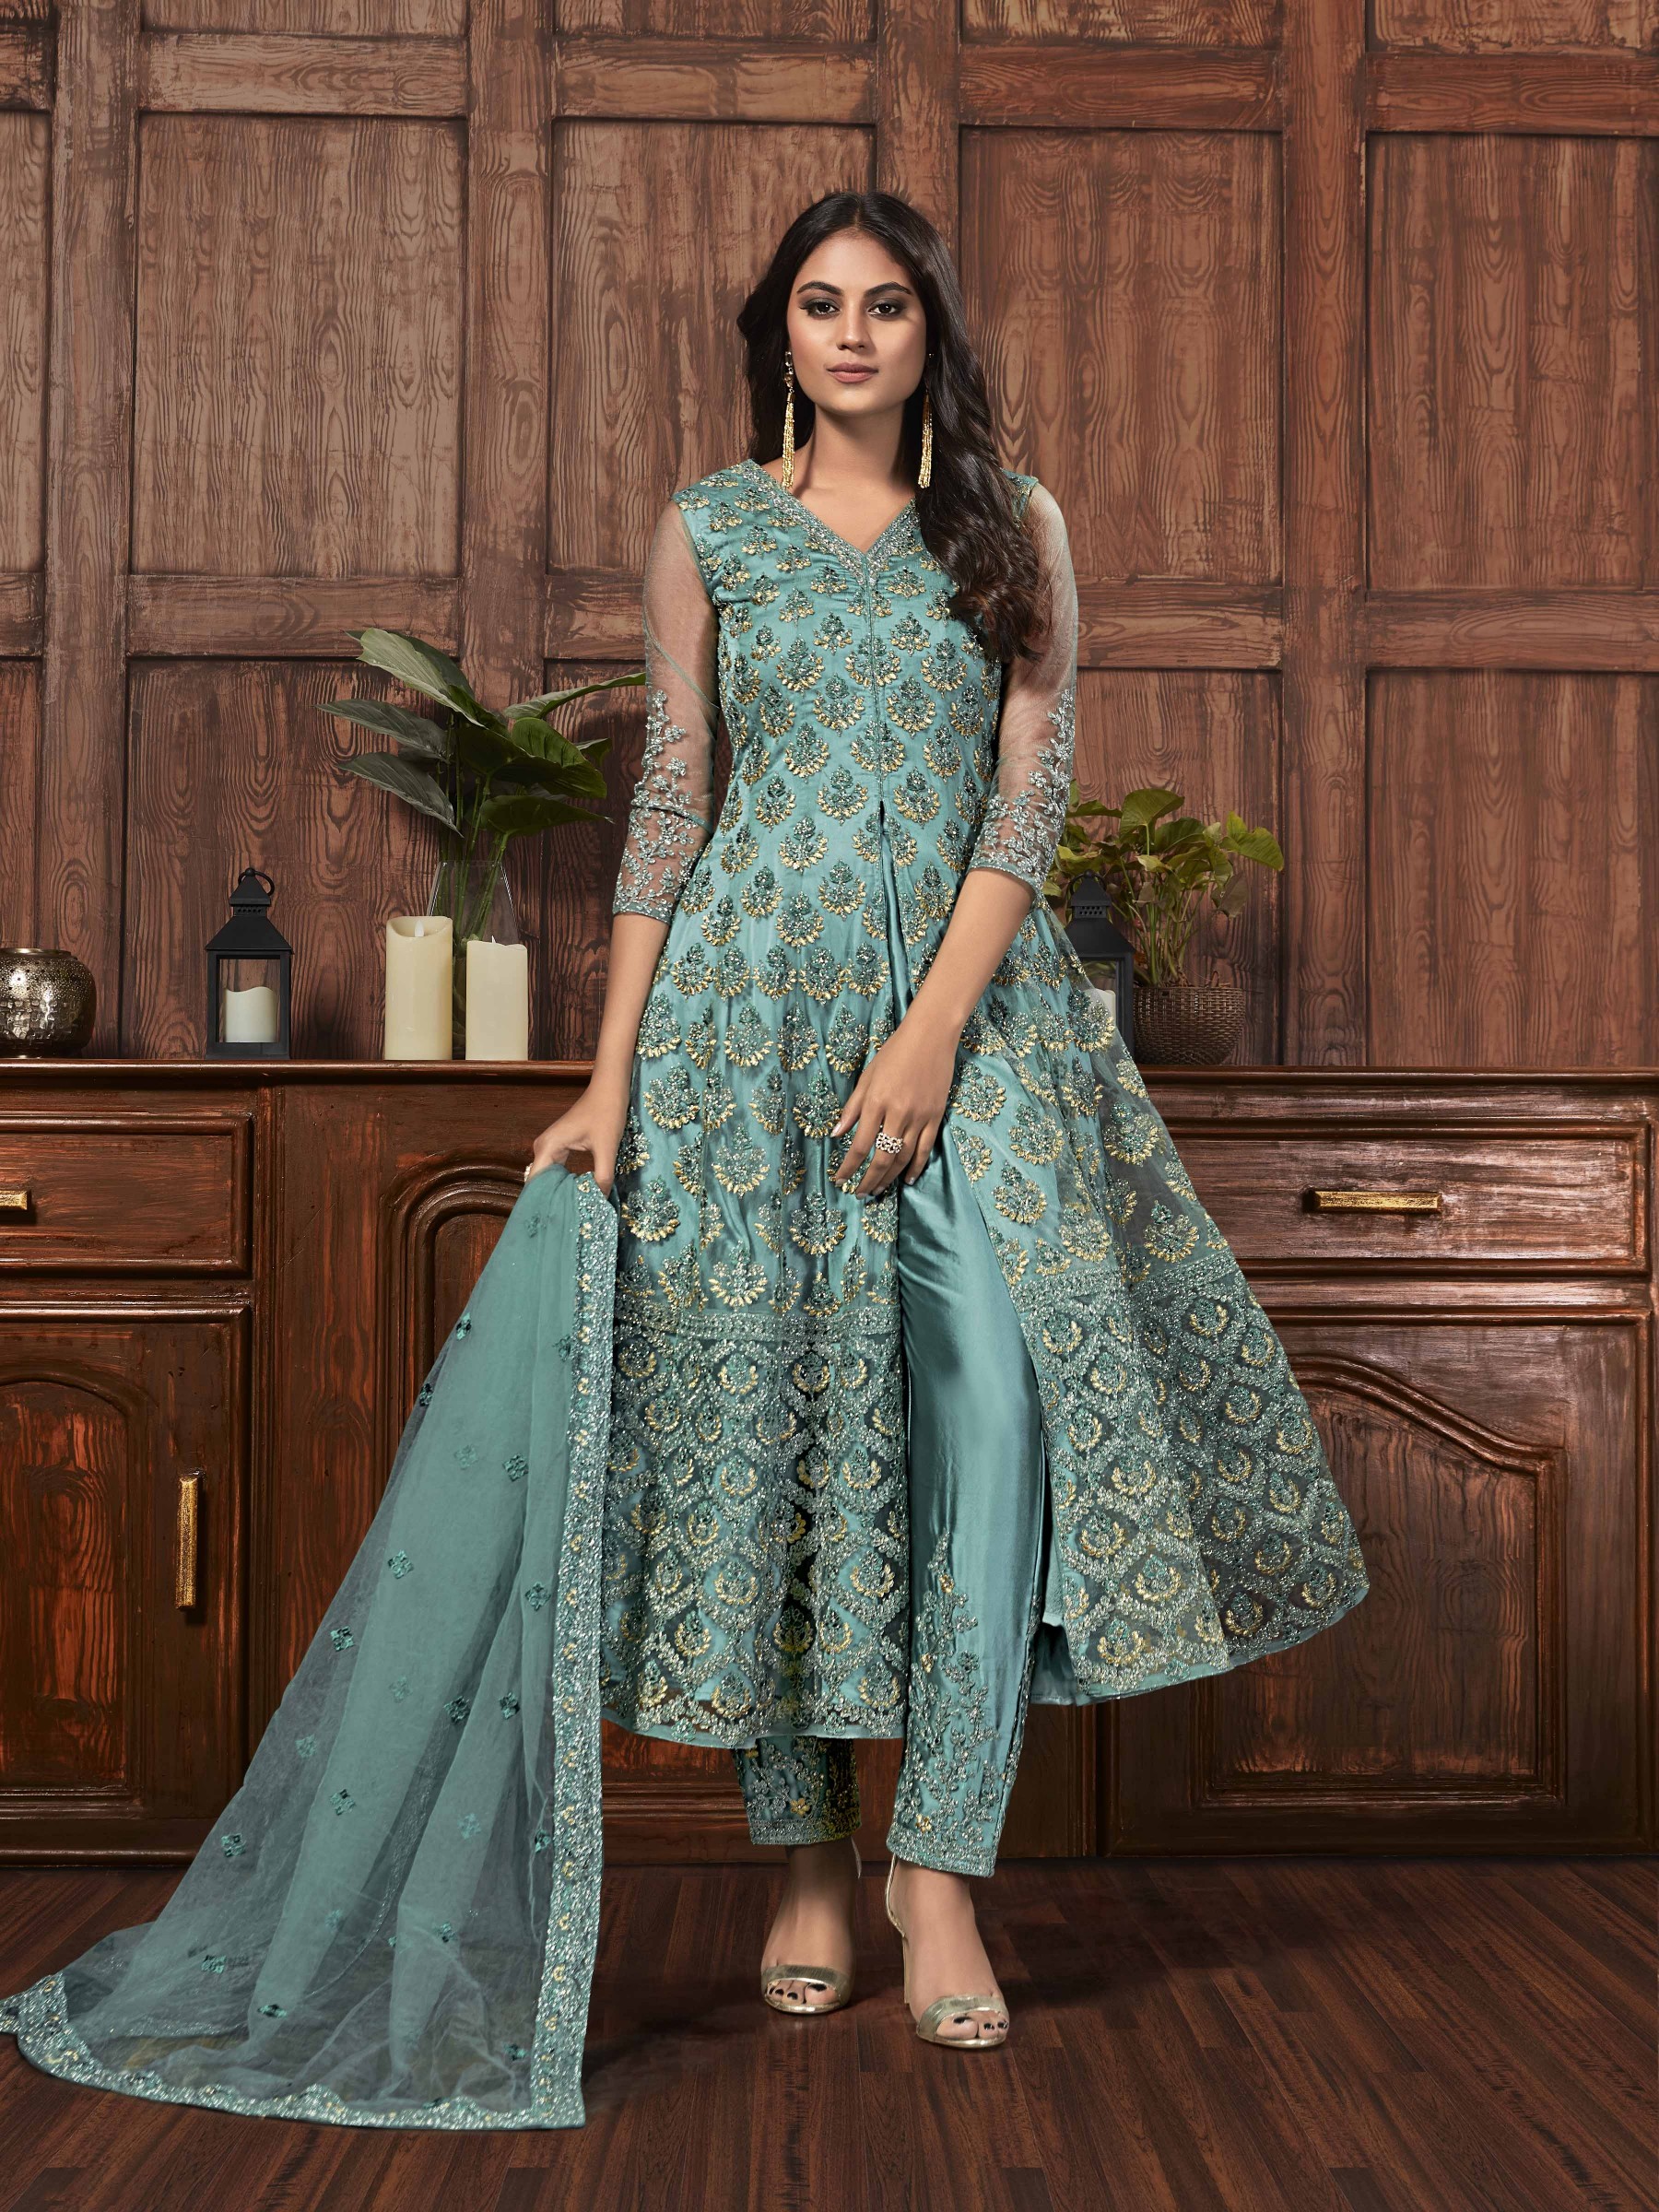 Butterfly Net Fabric Party Wear Readymade Suit In Turquoise Color With Embroidery 